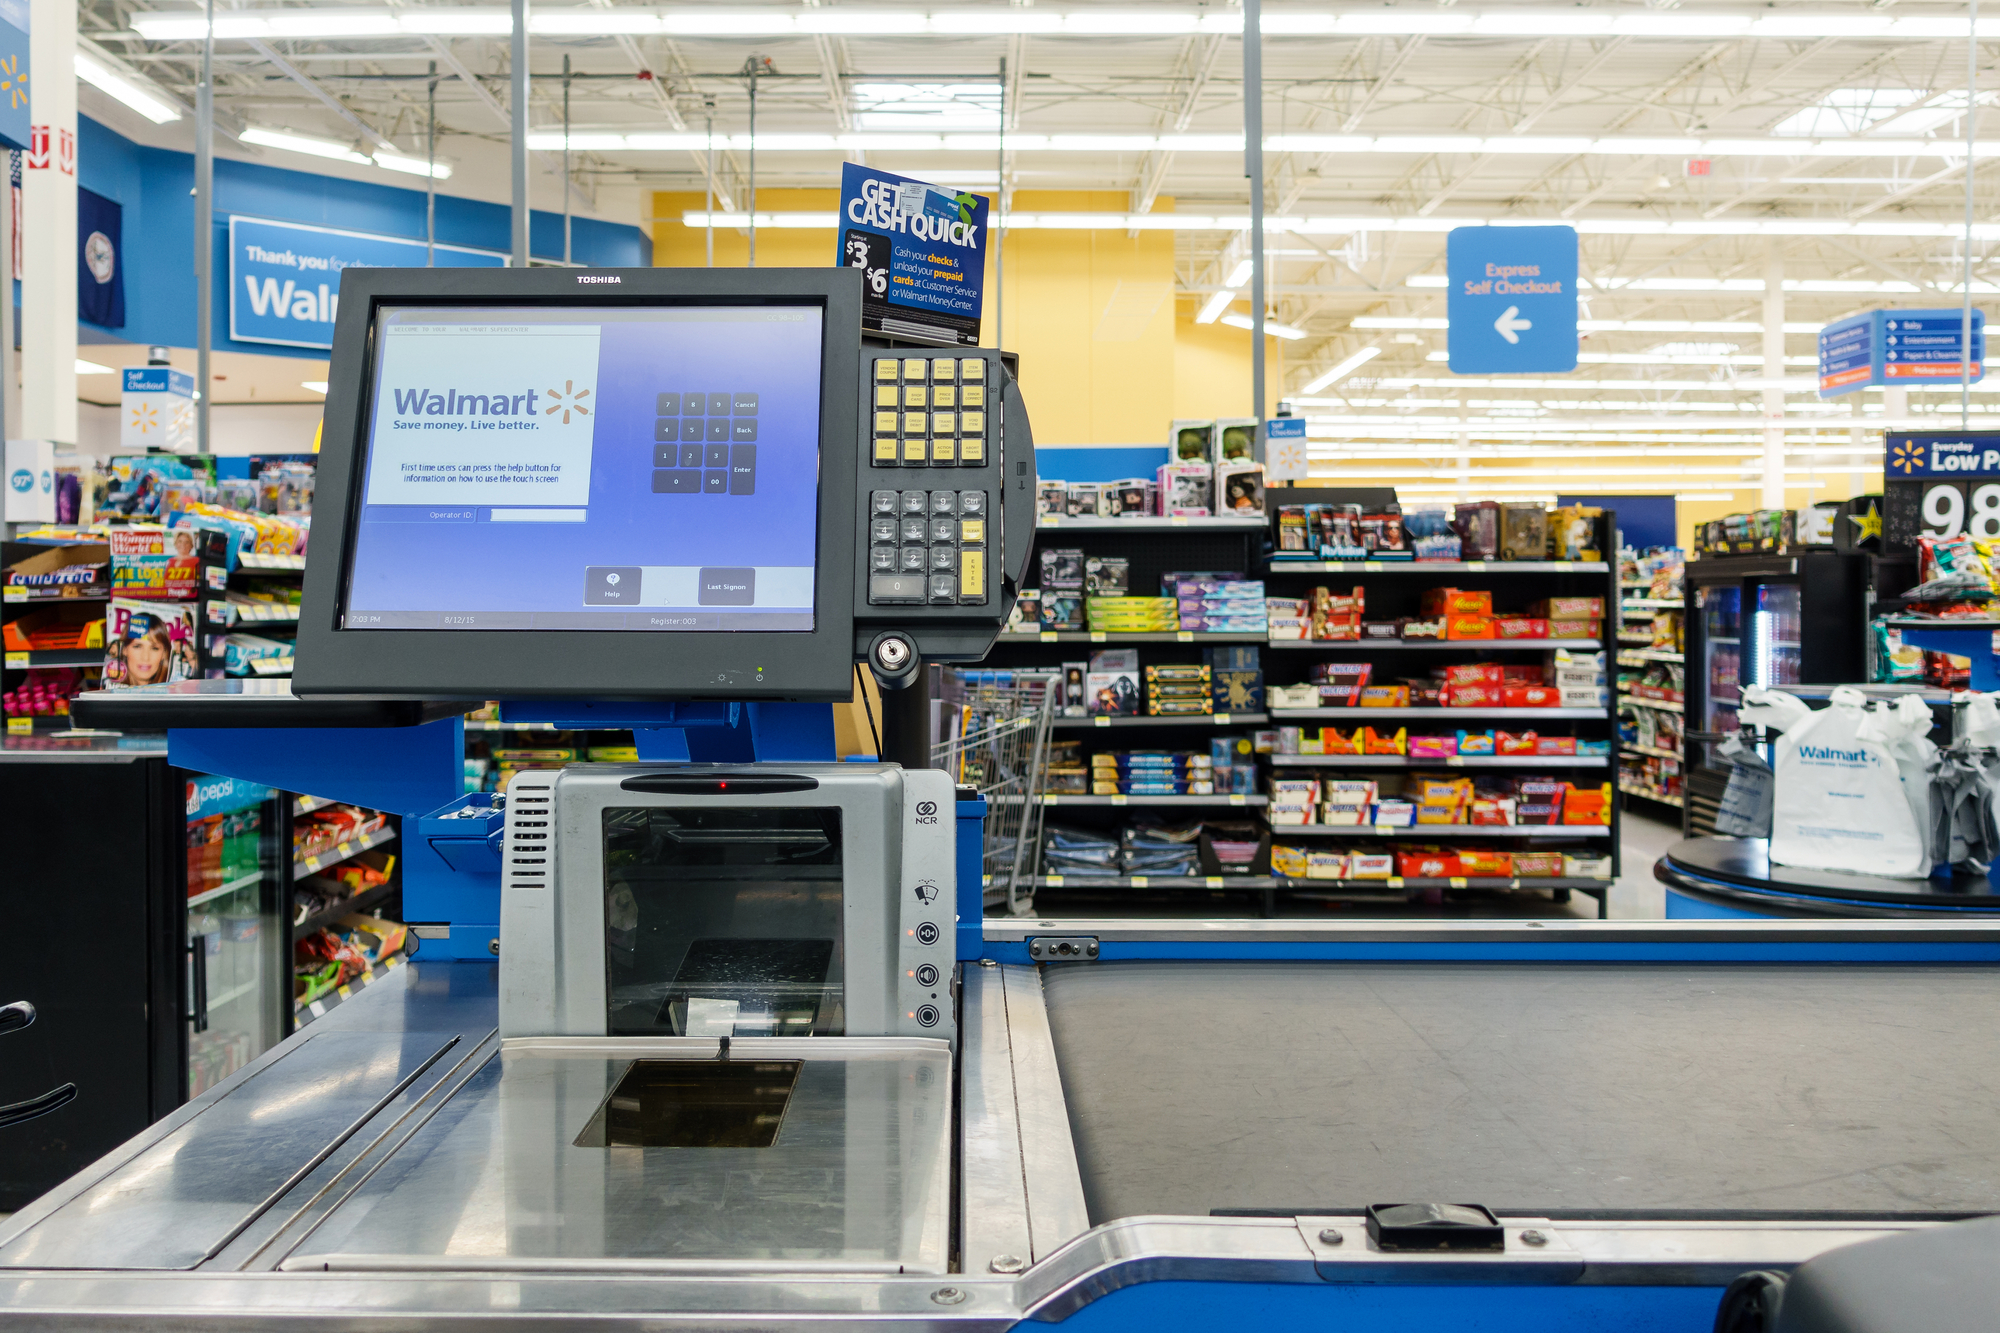 Walmart Shoppers May Soon Have to Pay A Fee To Use Self-Checkout